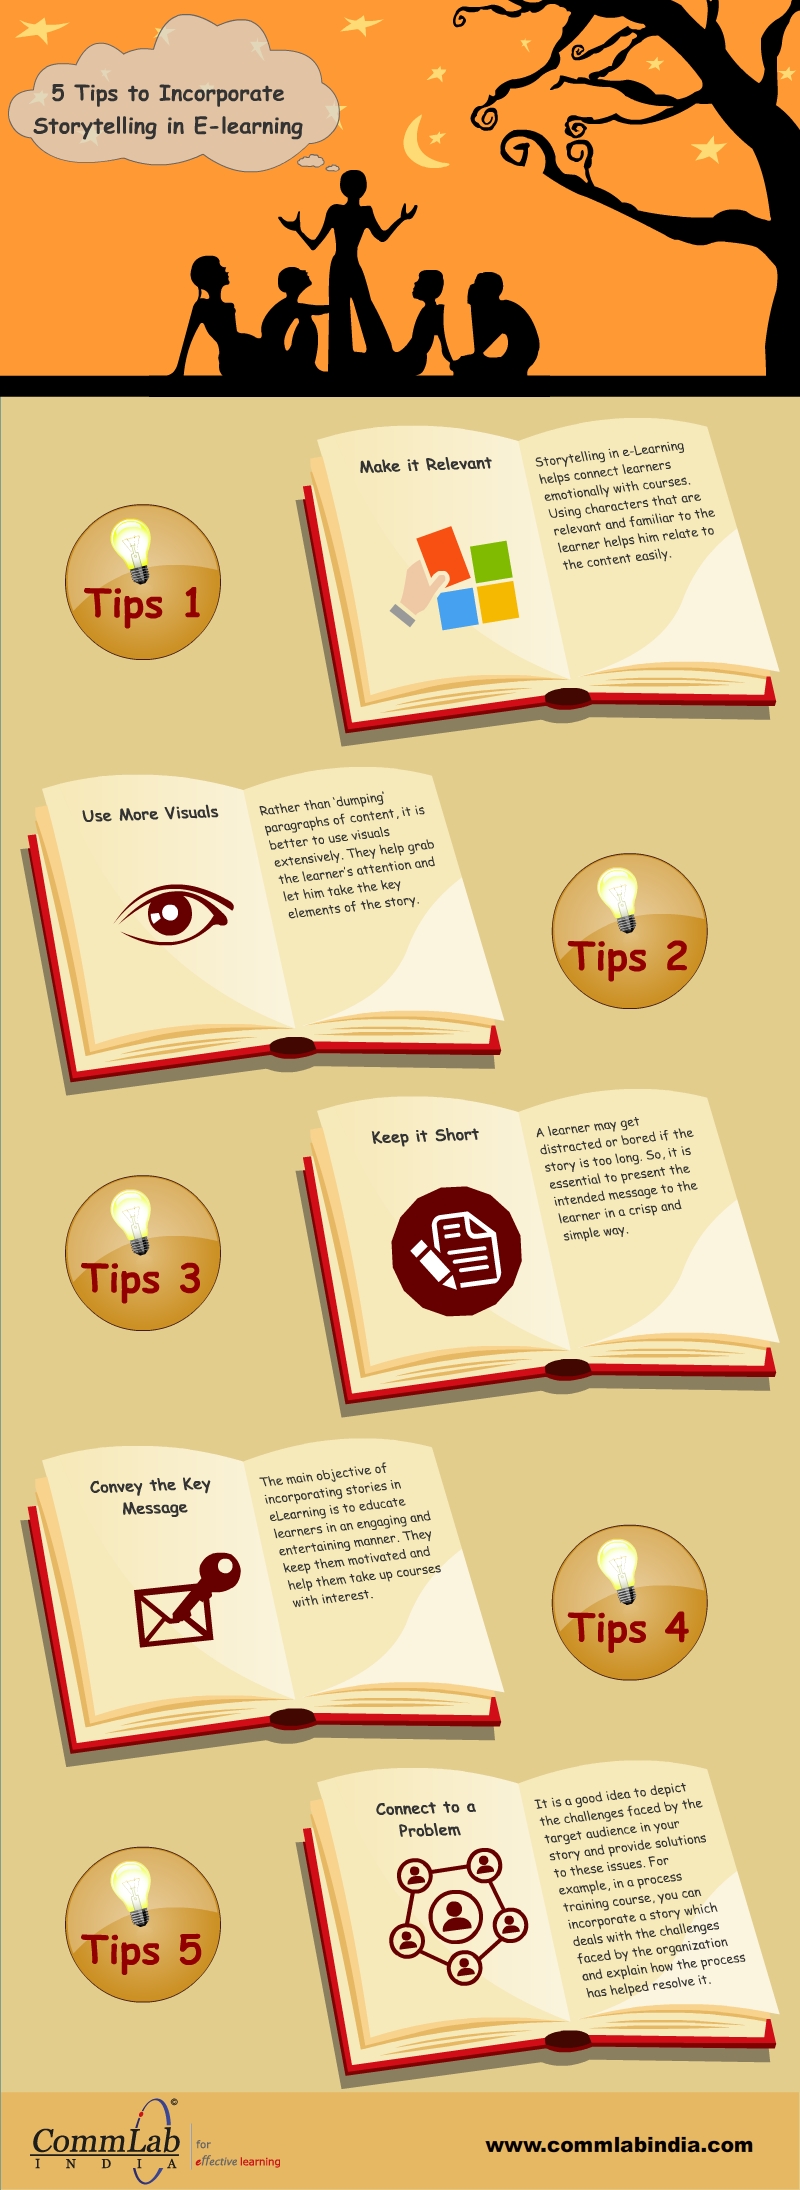 5 Tips to Incorporate Story Telling in E-Learning [Infographic]